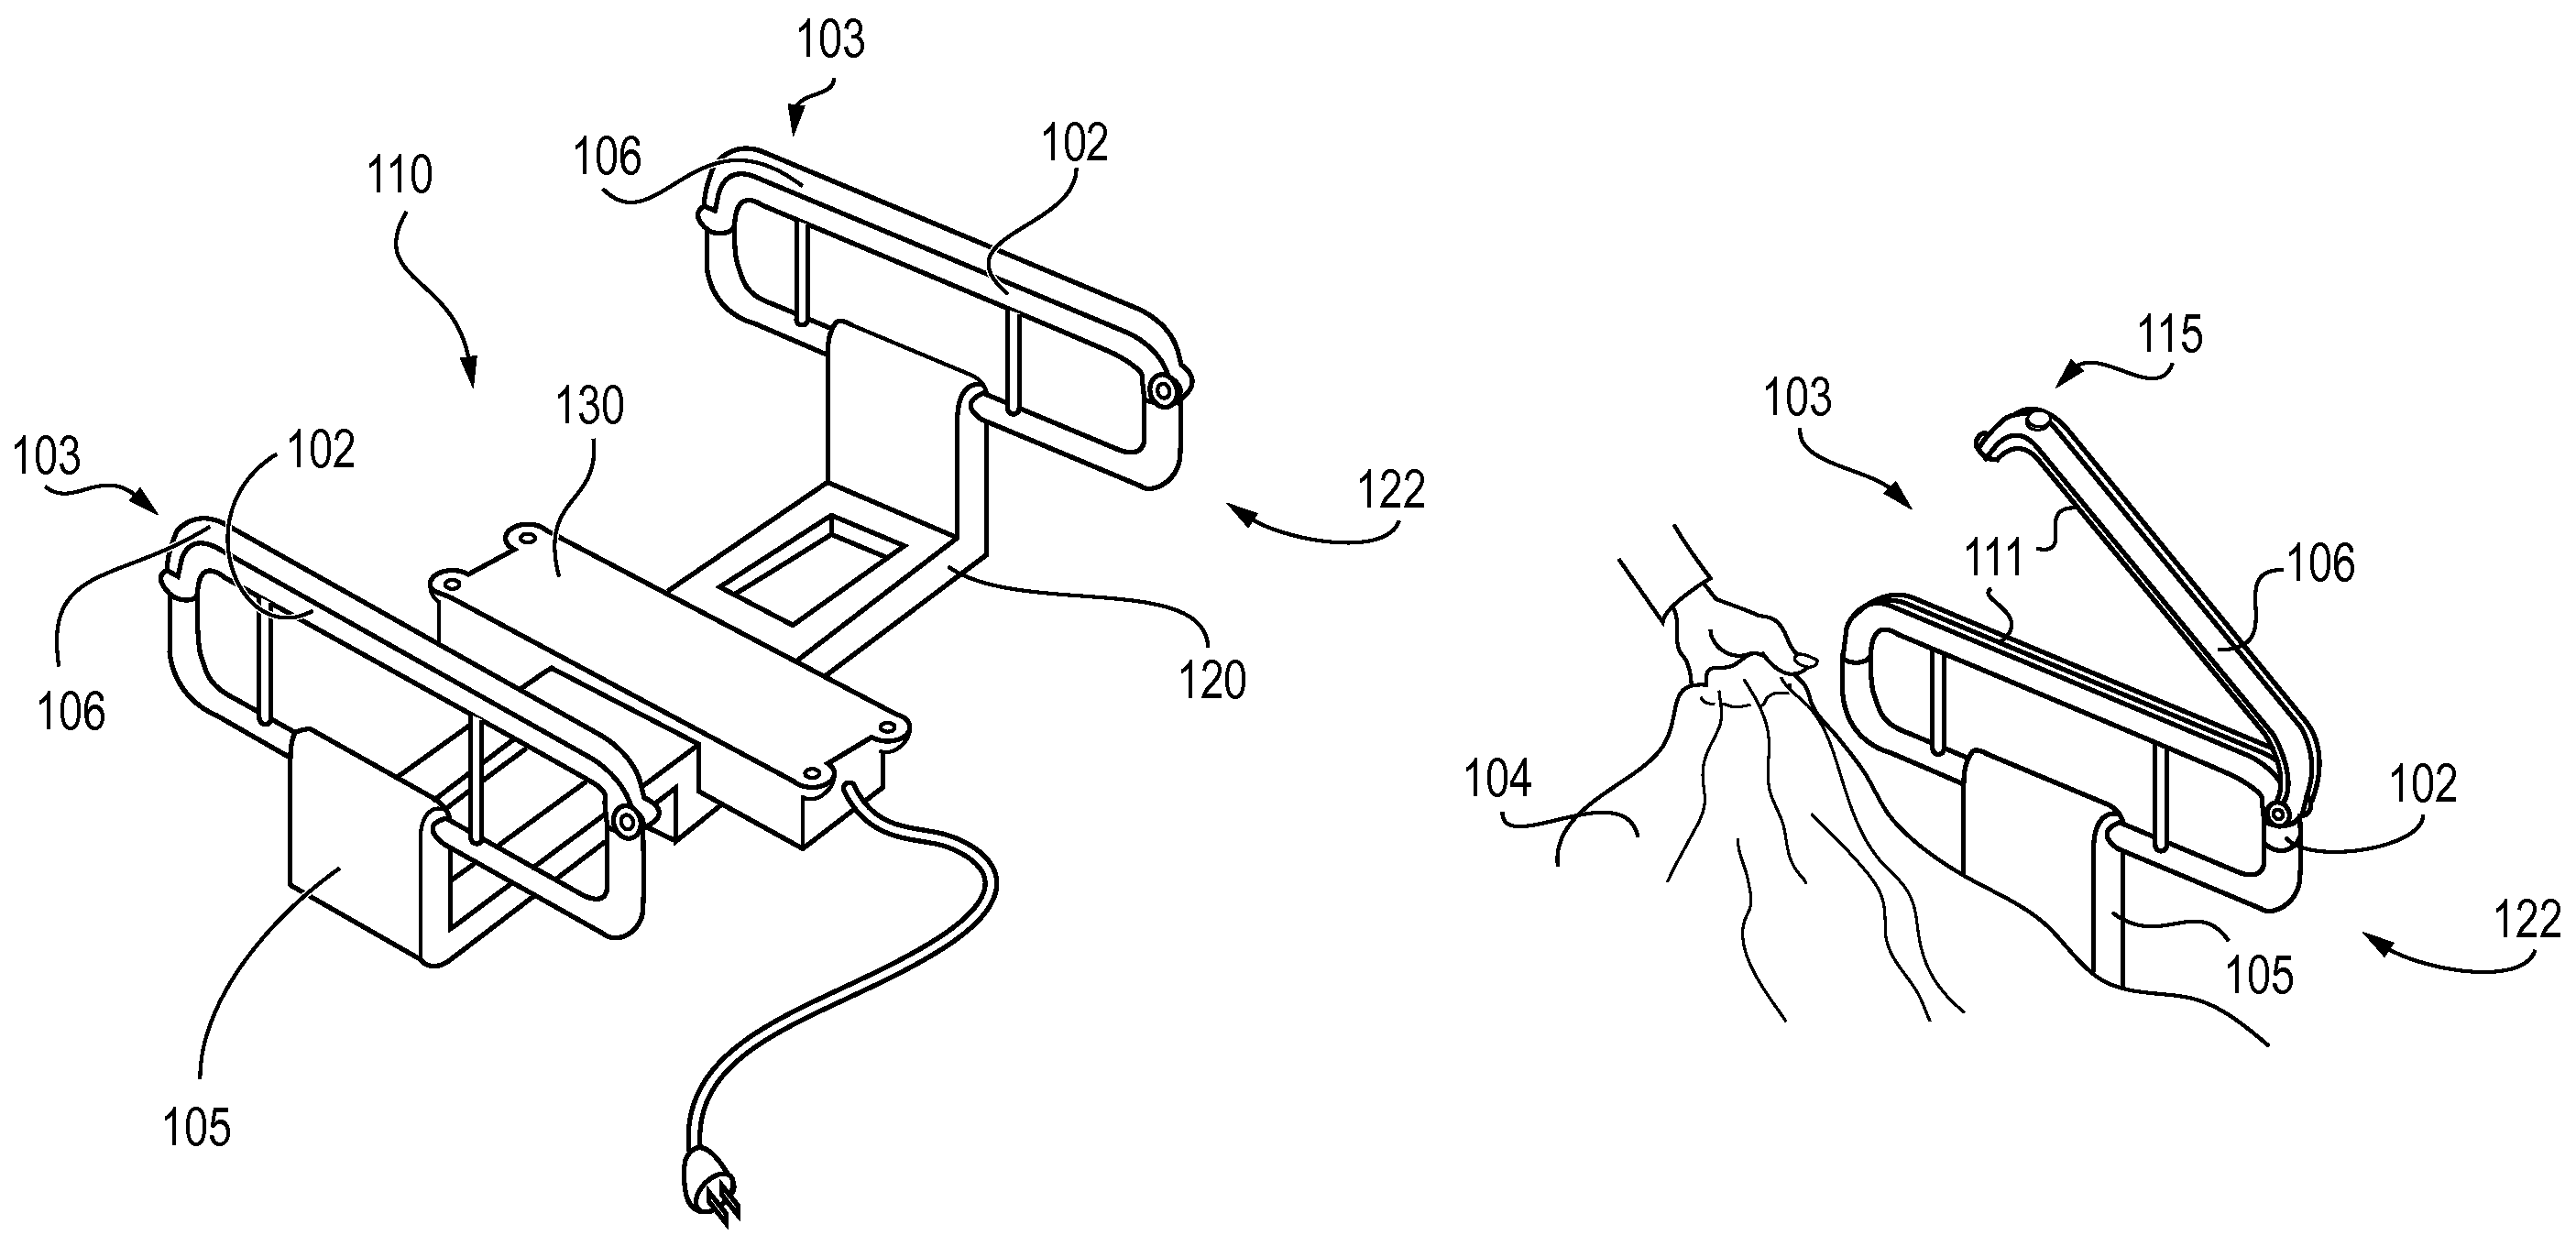 Device and method for positioning patients